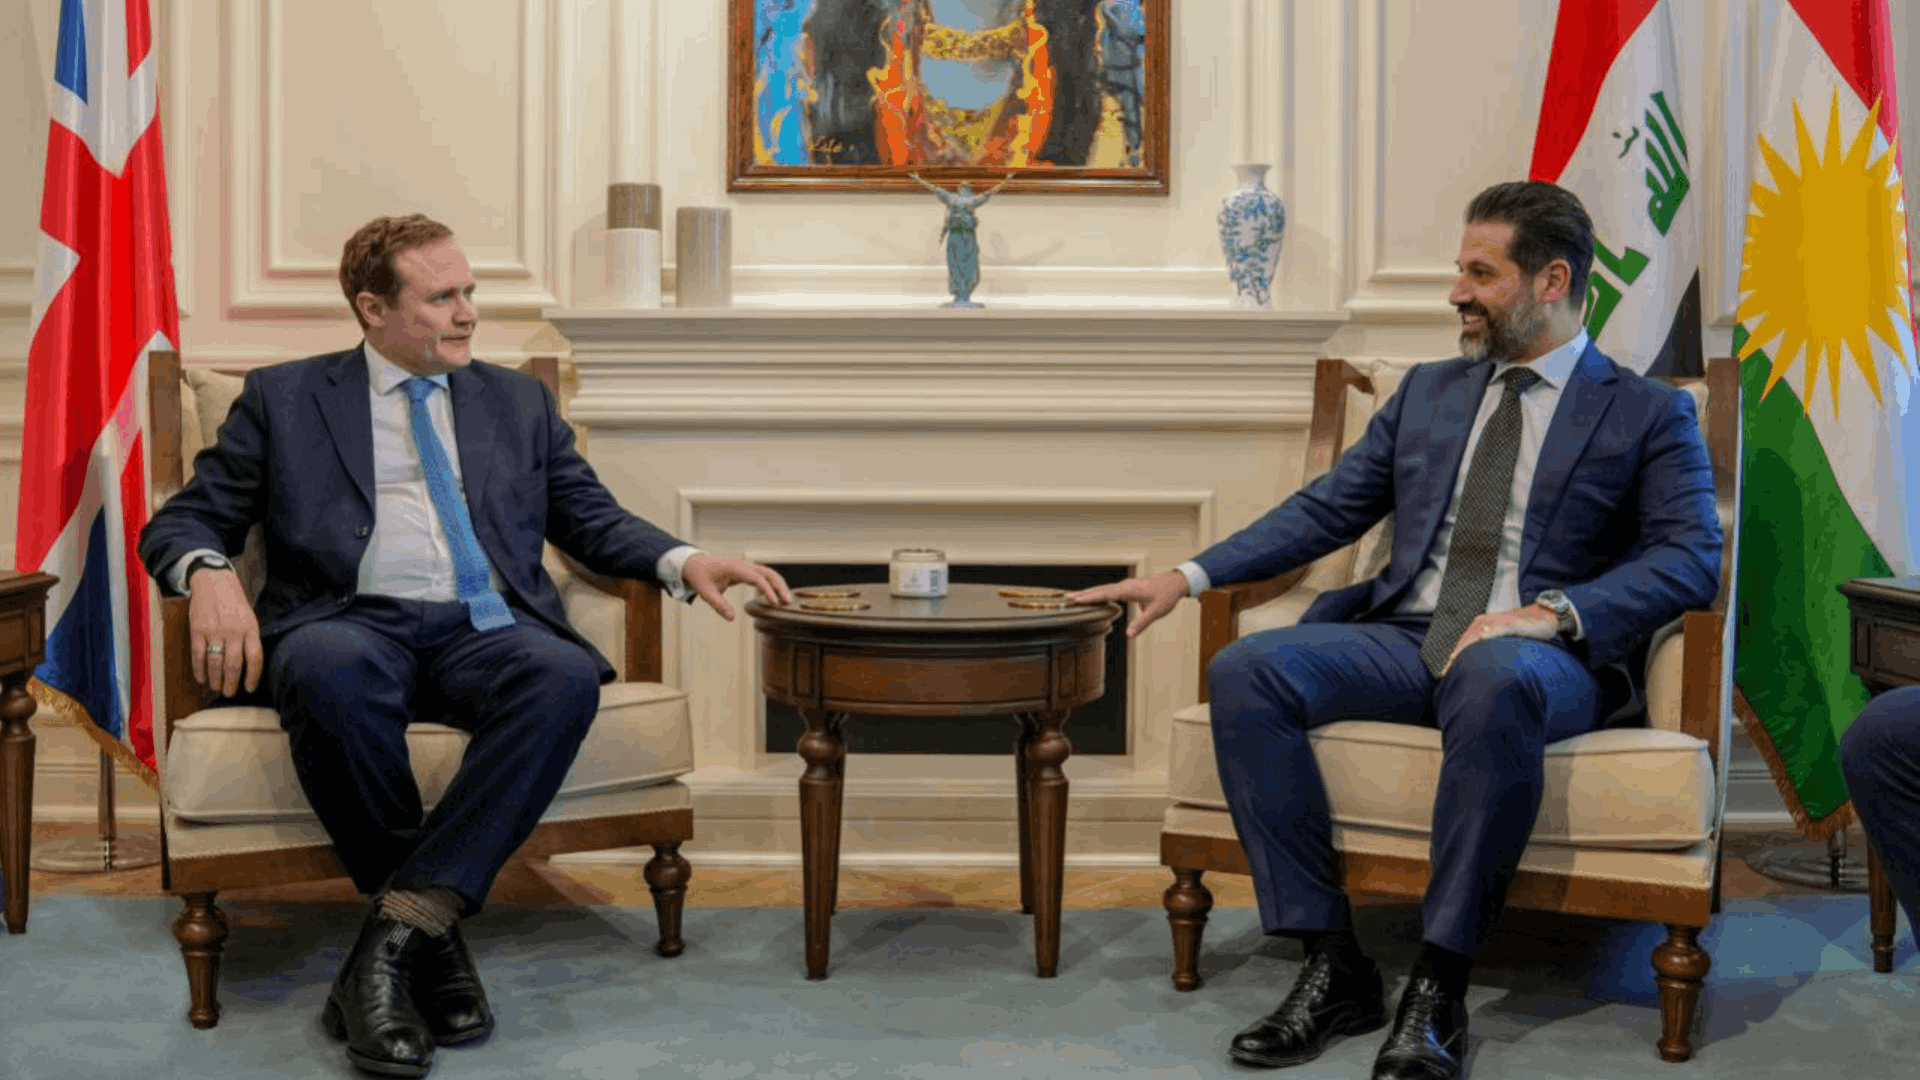  Deputy Prime Minister received British State Minister for Security